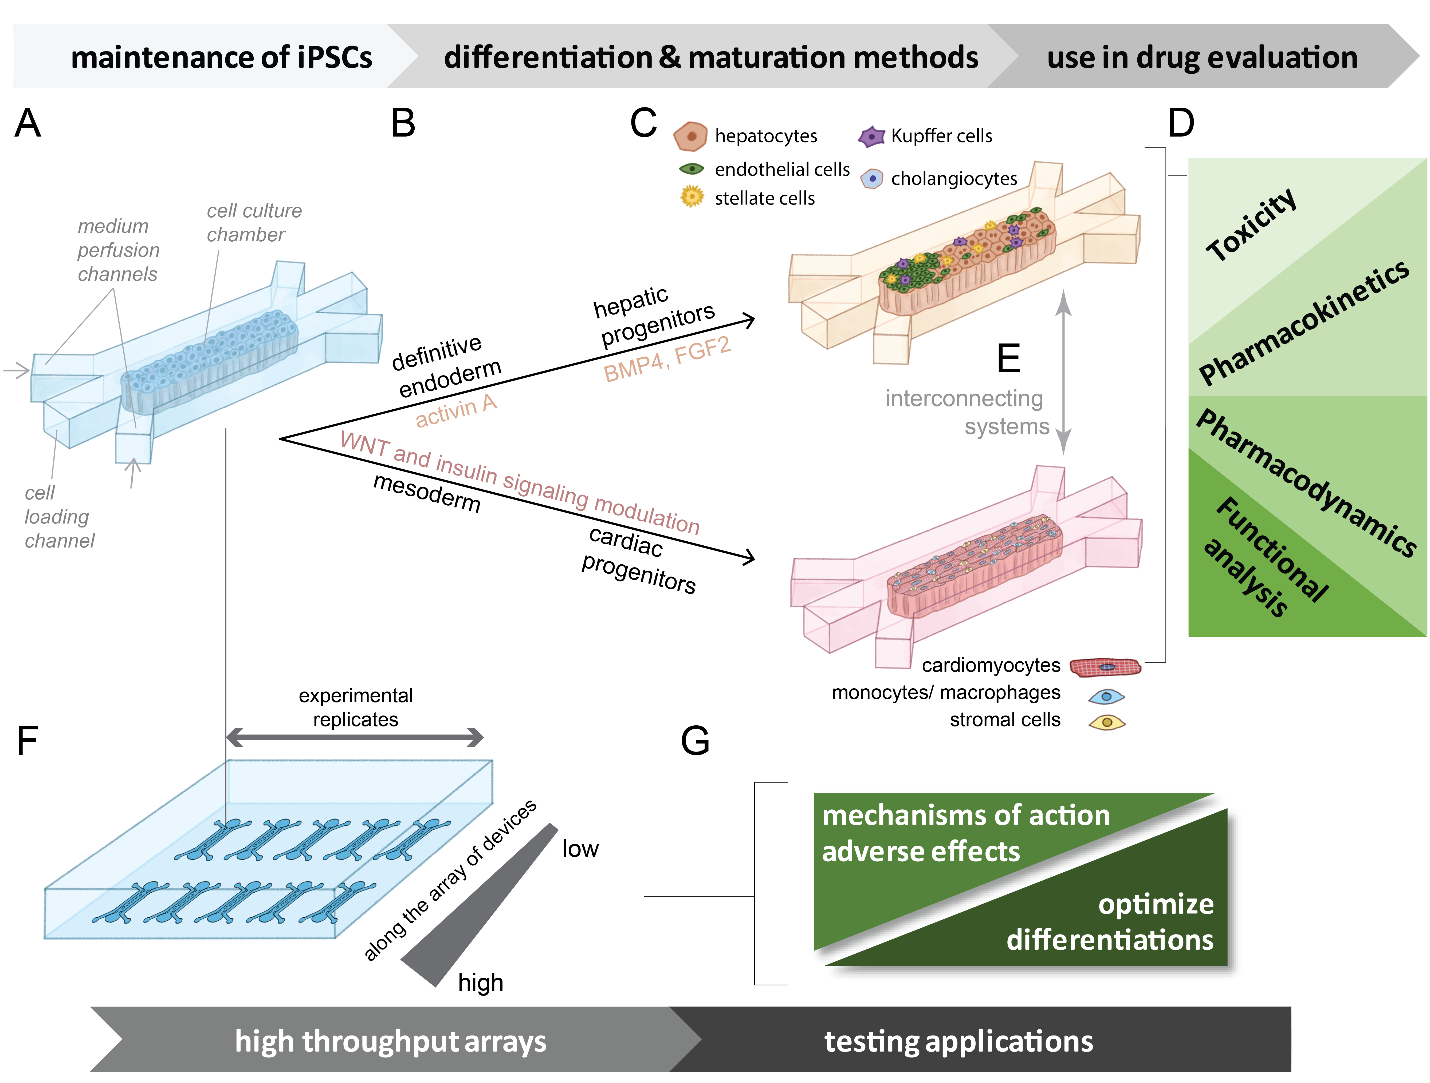 Figure 2. Possible device array systems for the differentiation of iPSCs to hepatic or cardiac lineages that can be interconnected and used to analyze effects. 